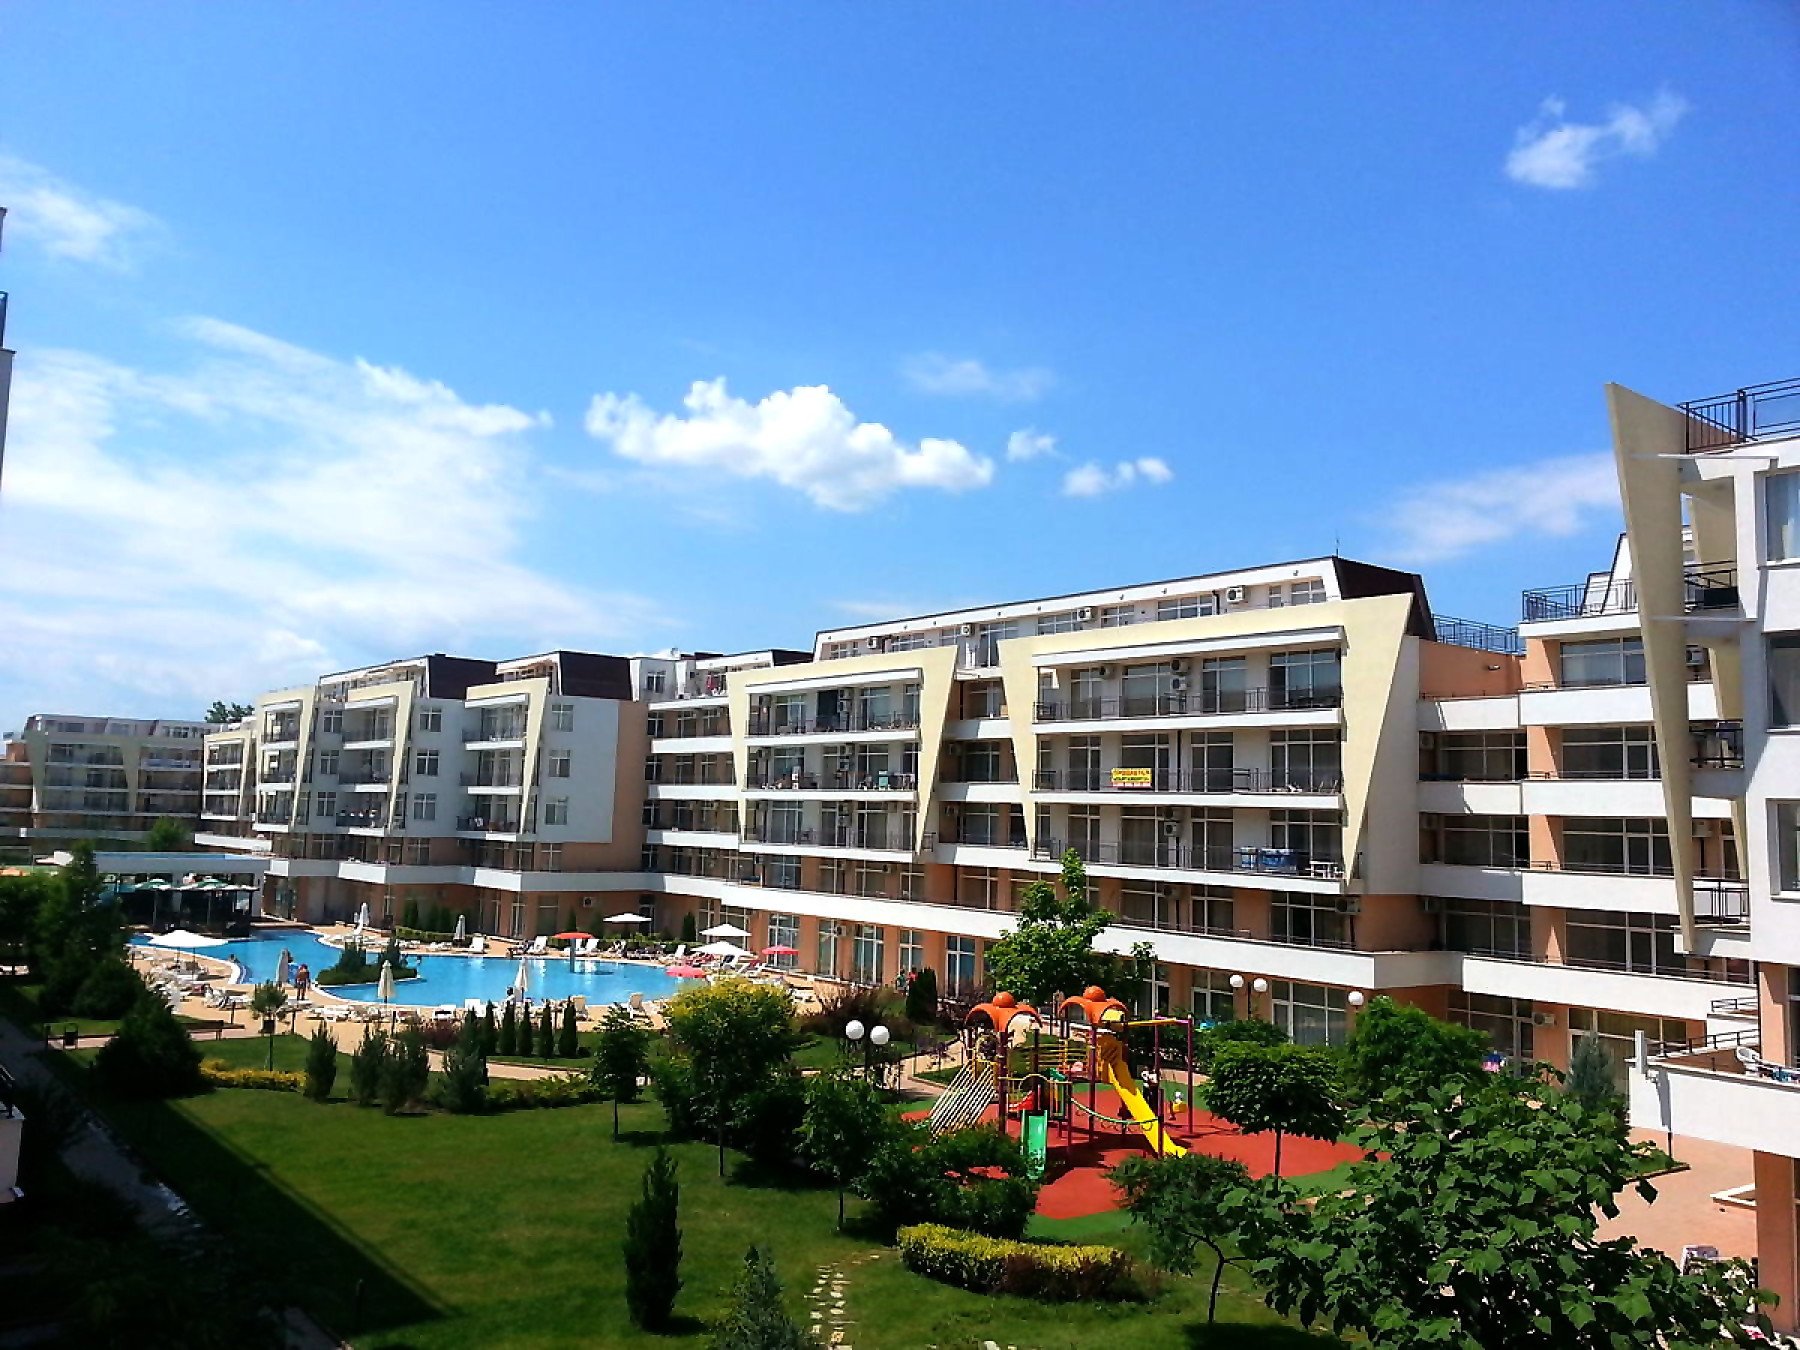 For Sale: One- bedroom apartment in Sunny Beach, Grand Kamelia complex.